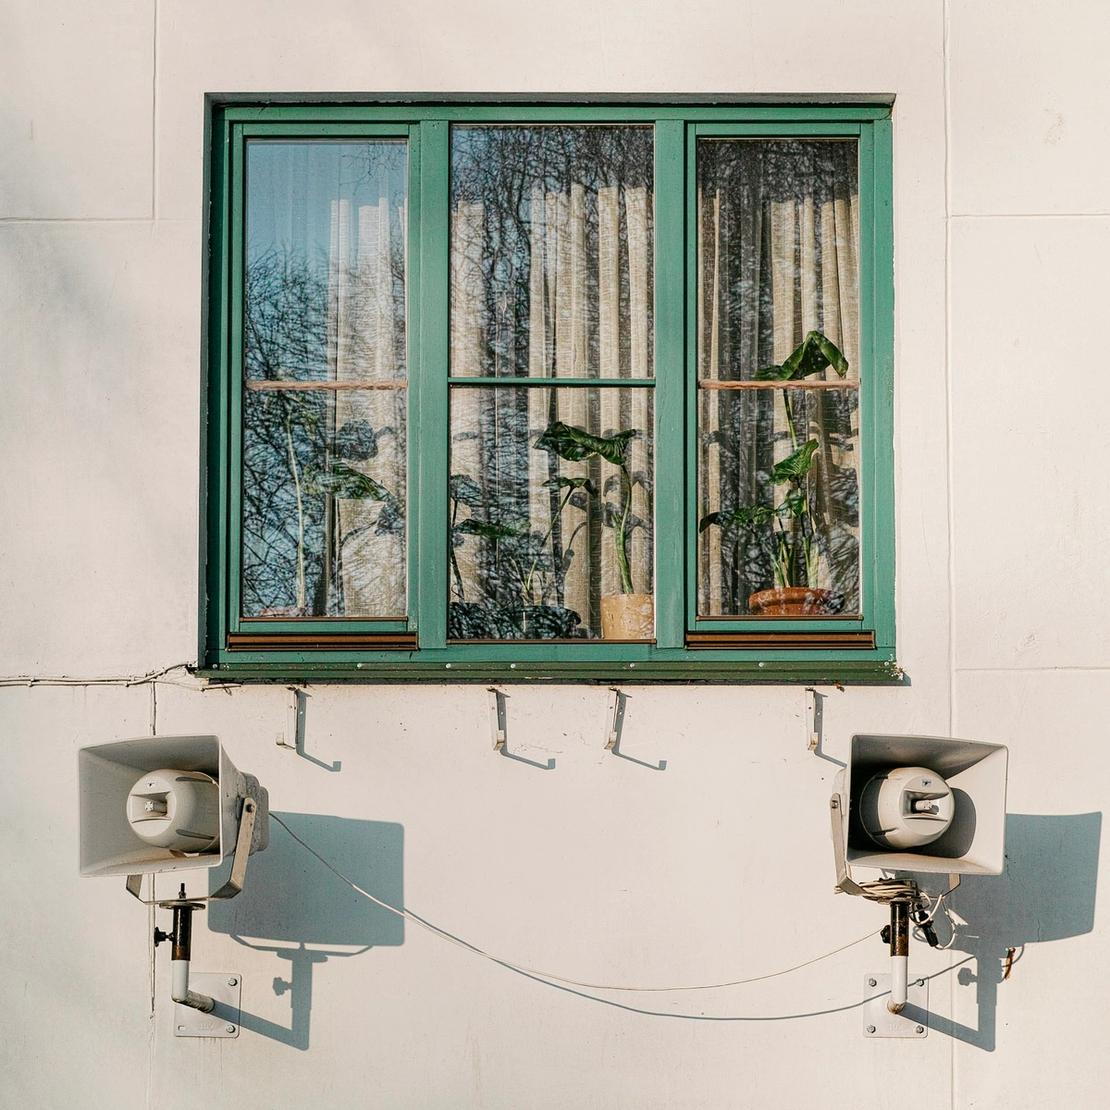 Photo of green window and two loudspeakers.